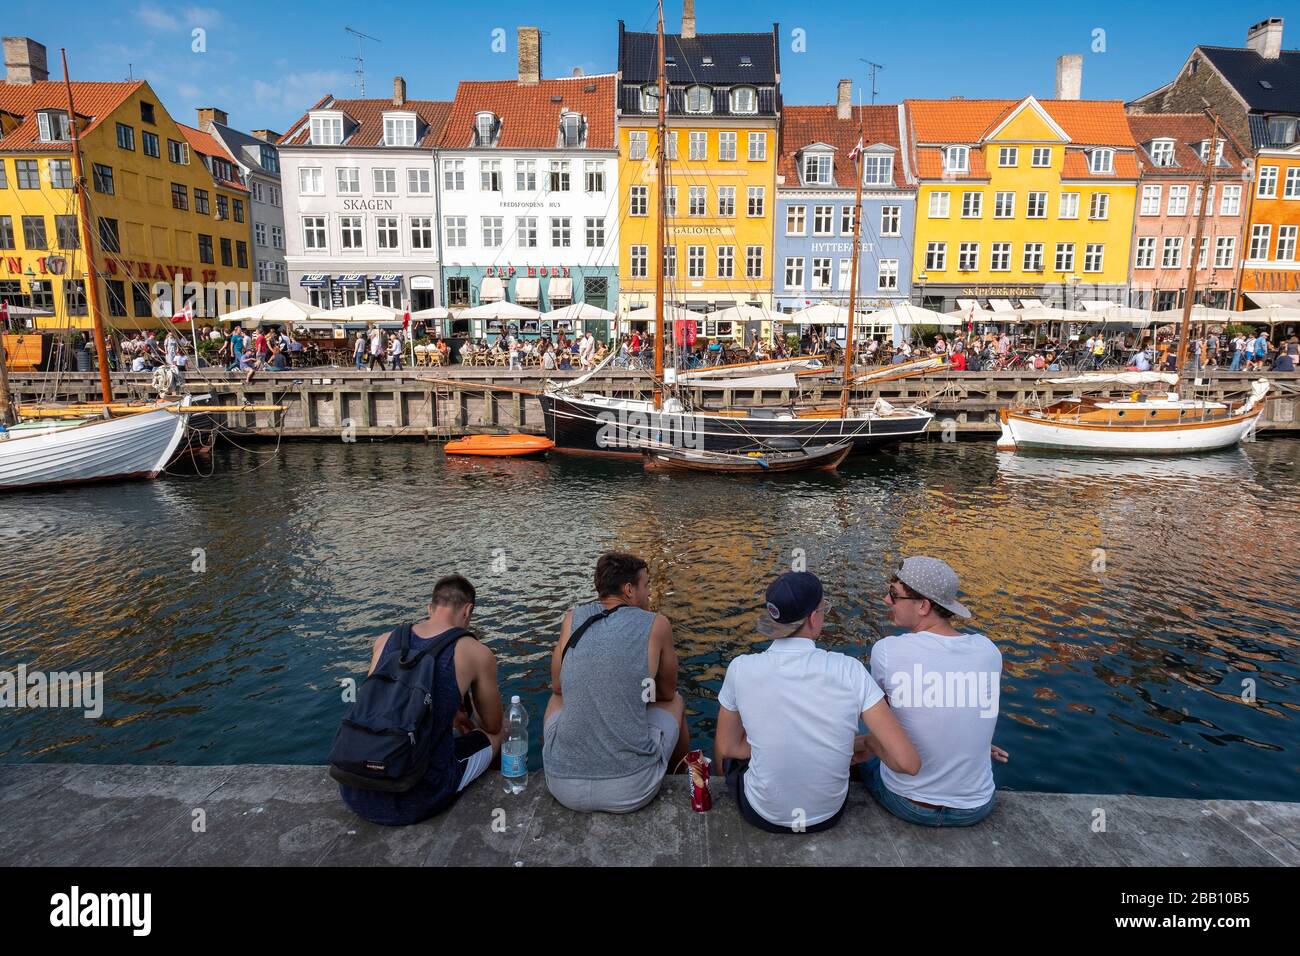 Friends hanging out on the waterfront of the Nyhavn canal in Copenhagen, Denmark, Europe Stock Photo